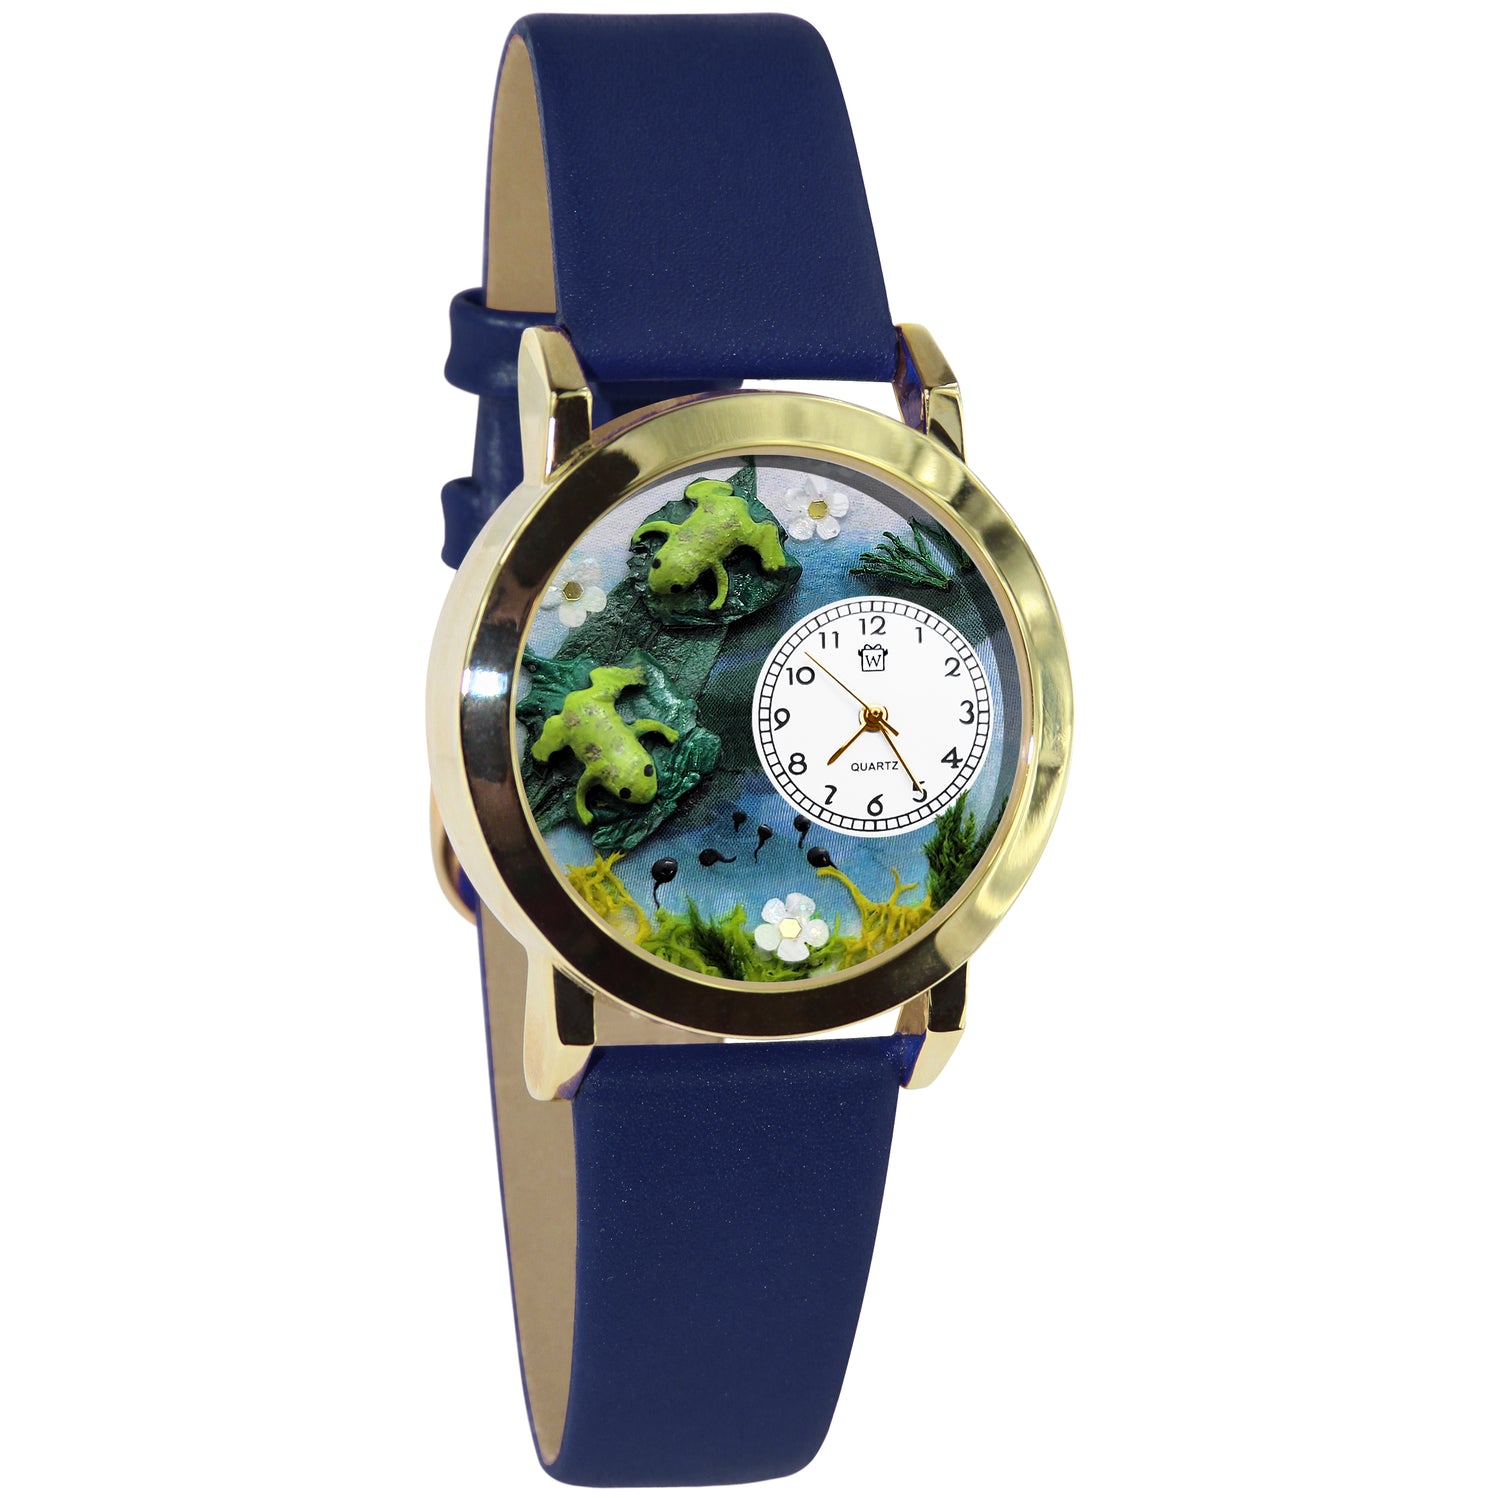 Whimsical Gifts | Frogs 3D Watch Small Style | Handmade in USA | Animal Lover | Outdoor & Garden | Novelty Unique Fun Miniatures Gift | Gold Finish Navy Blue Leather Watch Band